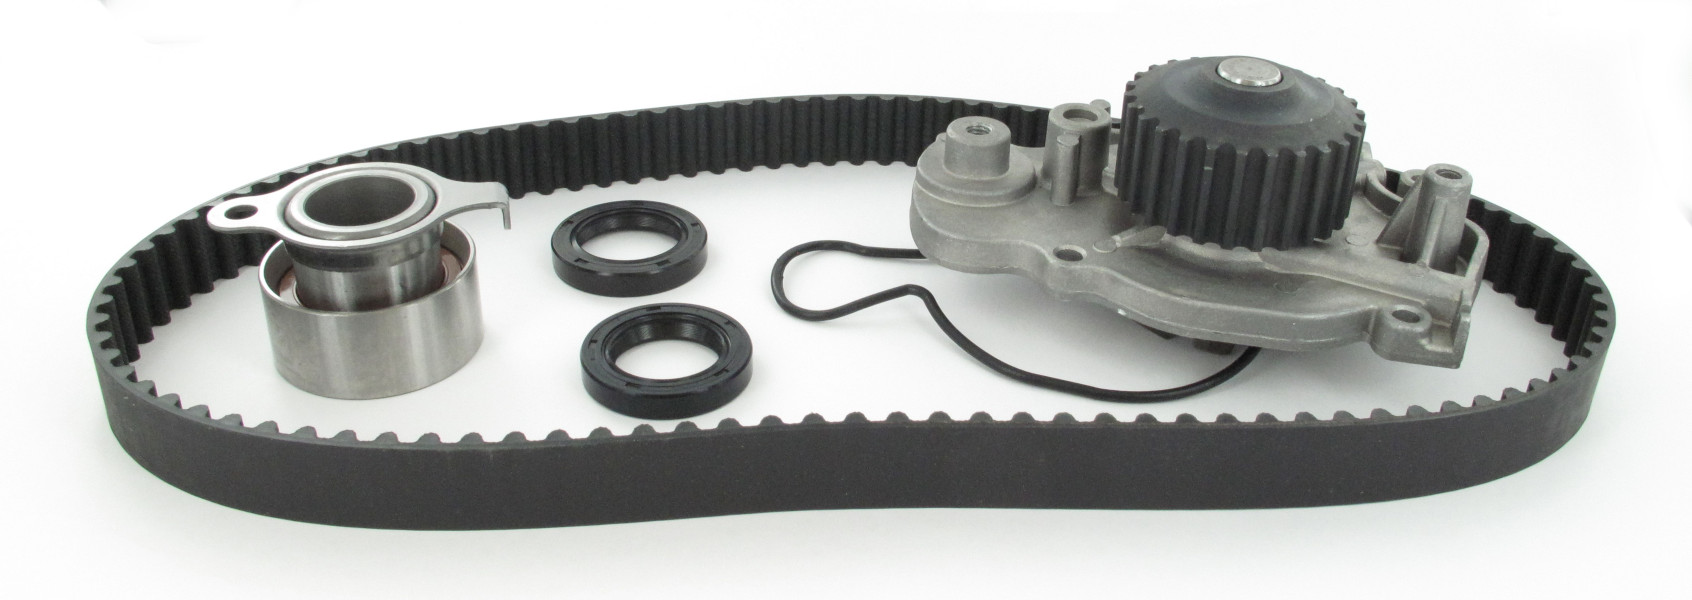 Image of Timing Belt And Waterpump Kit from SKF. Part number: SKF-TBK223WP